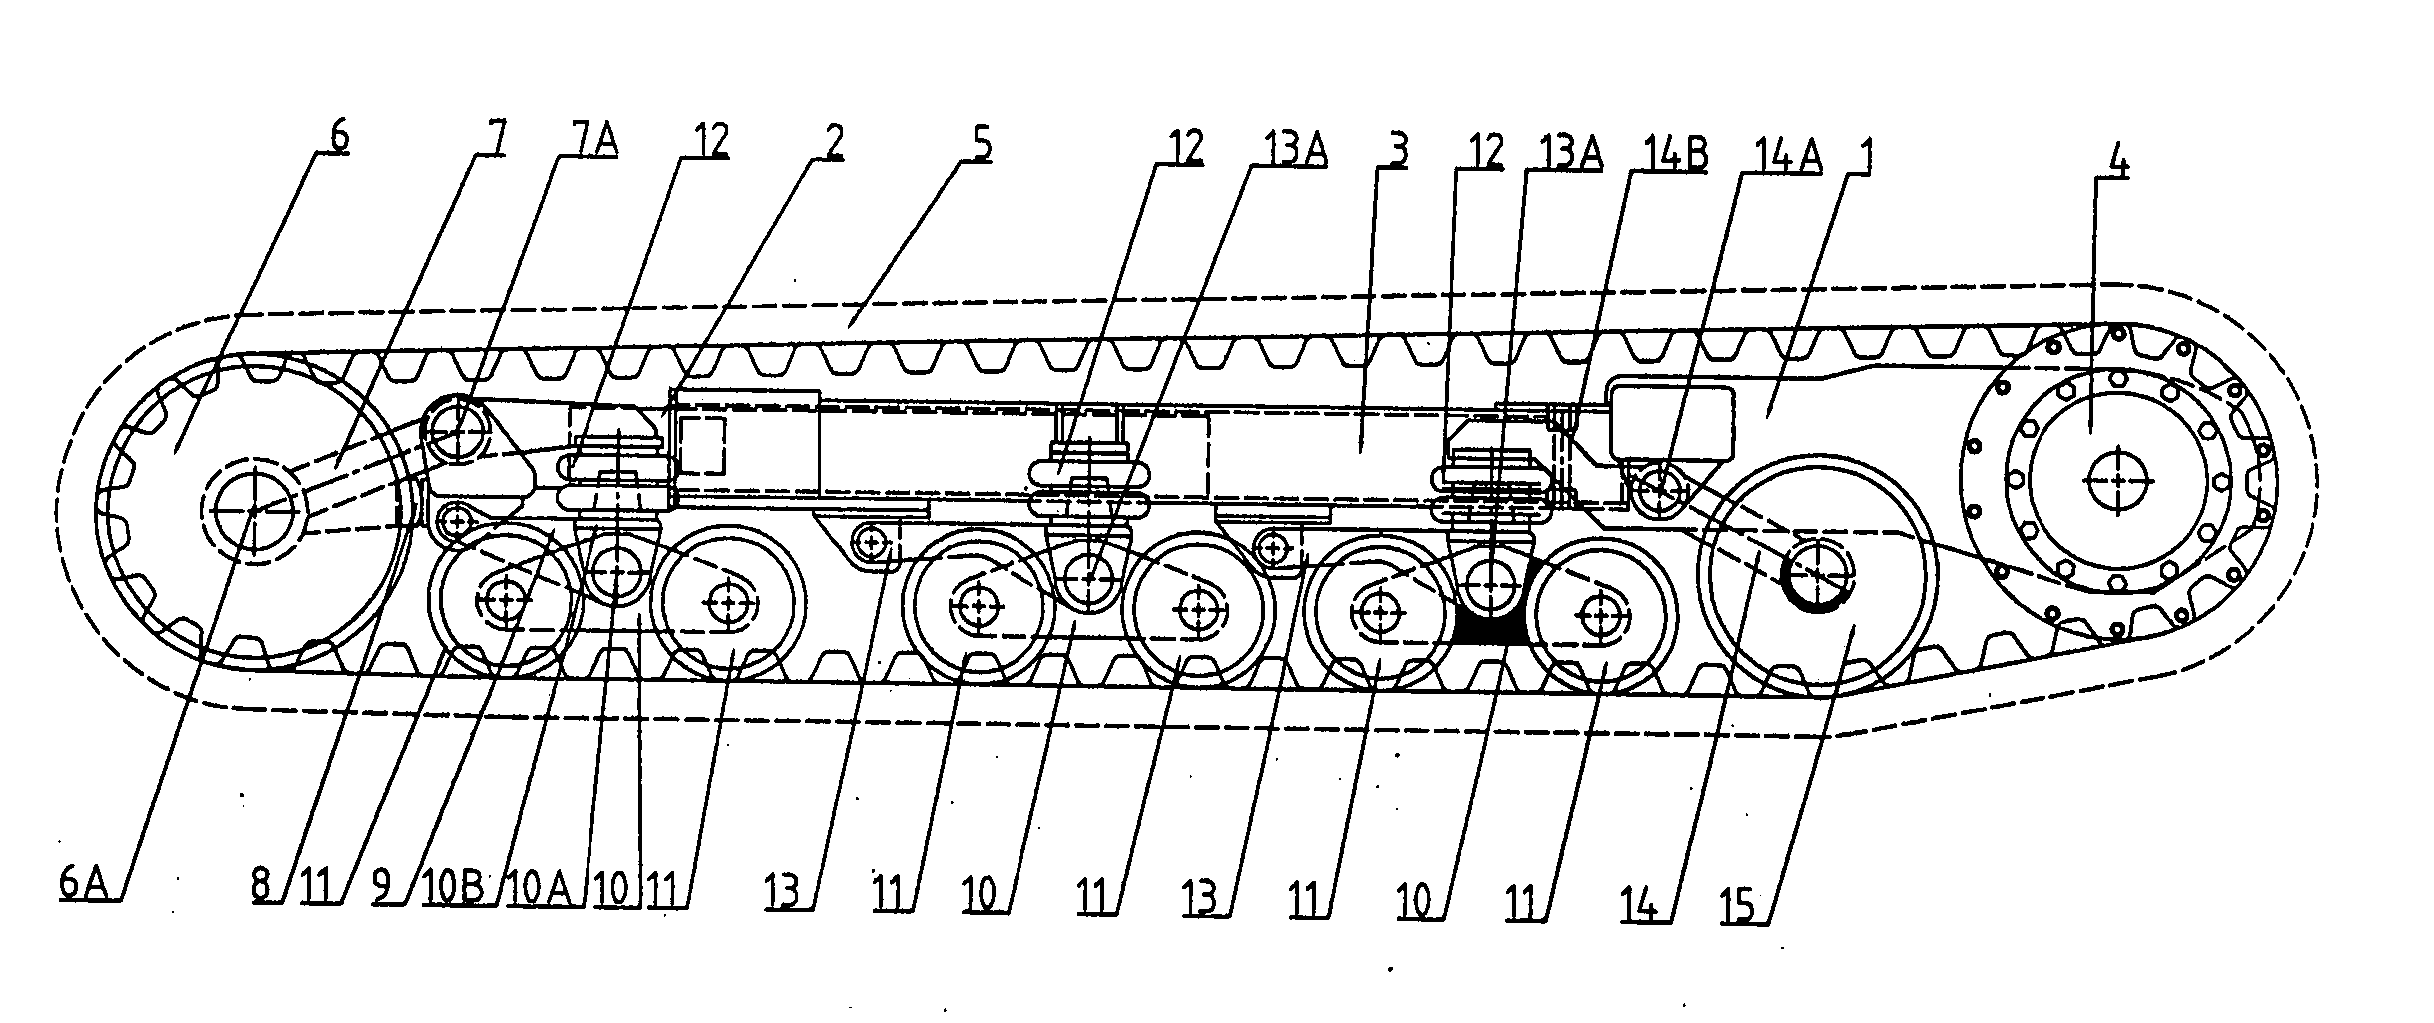 Vehicle track with idler and roller suspension